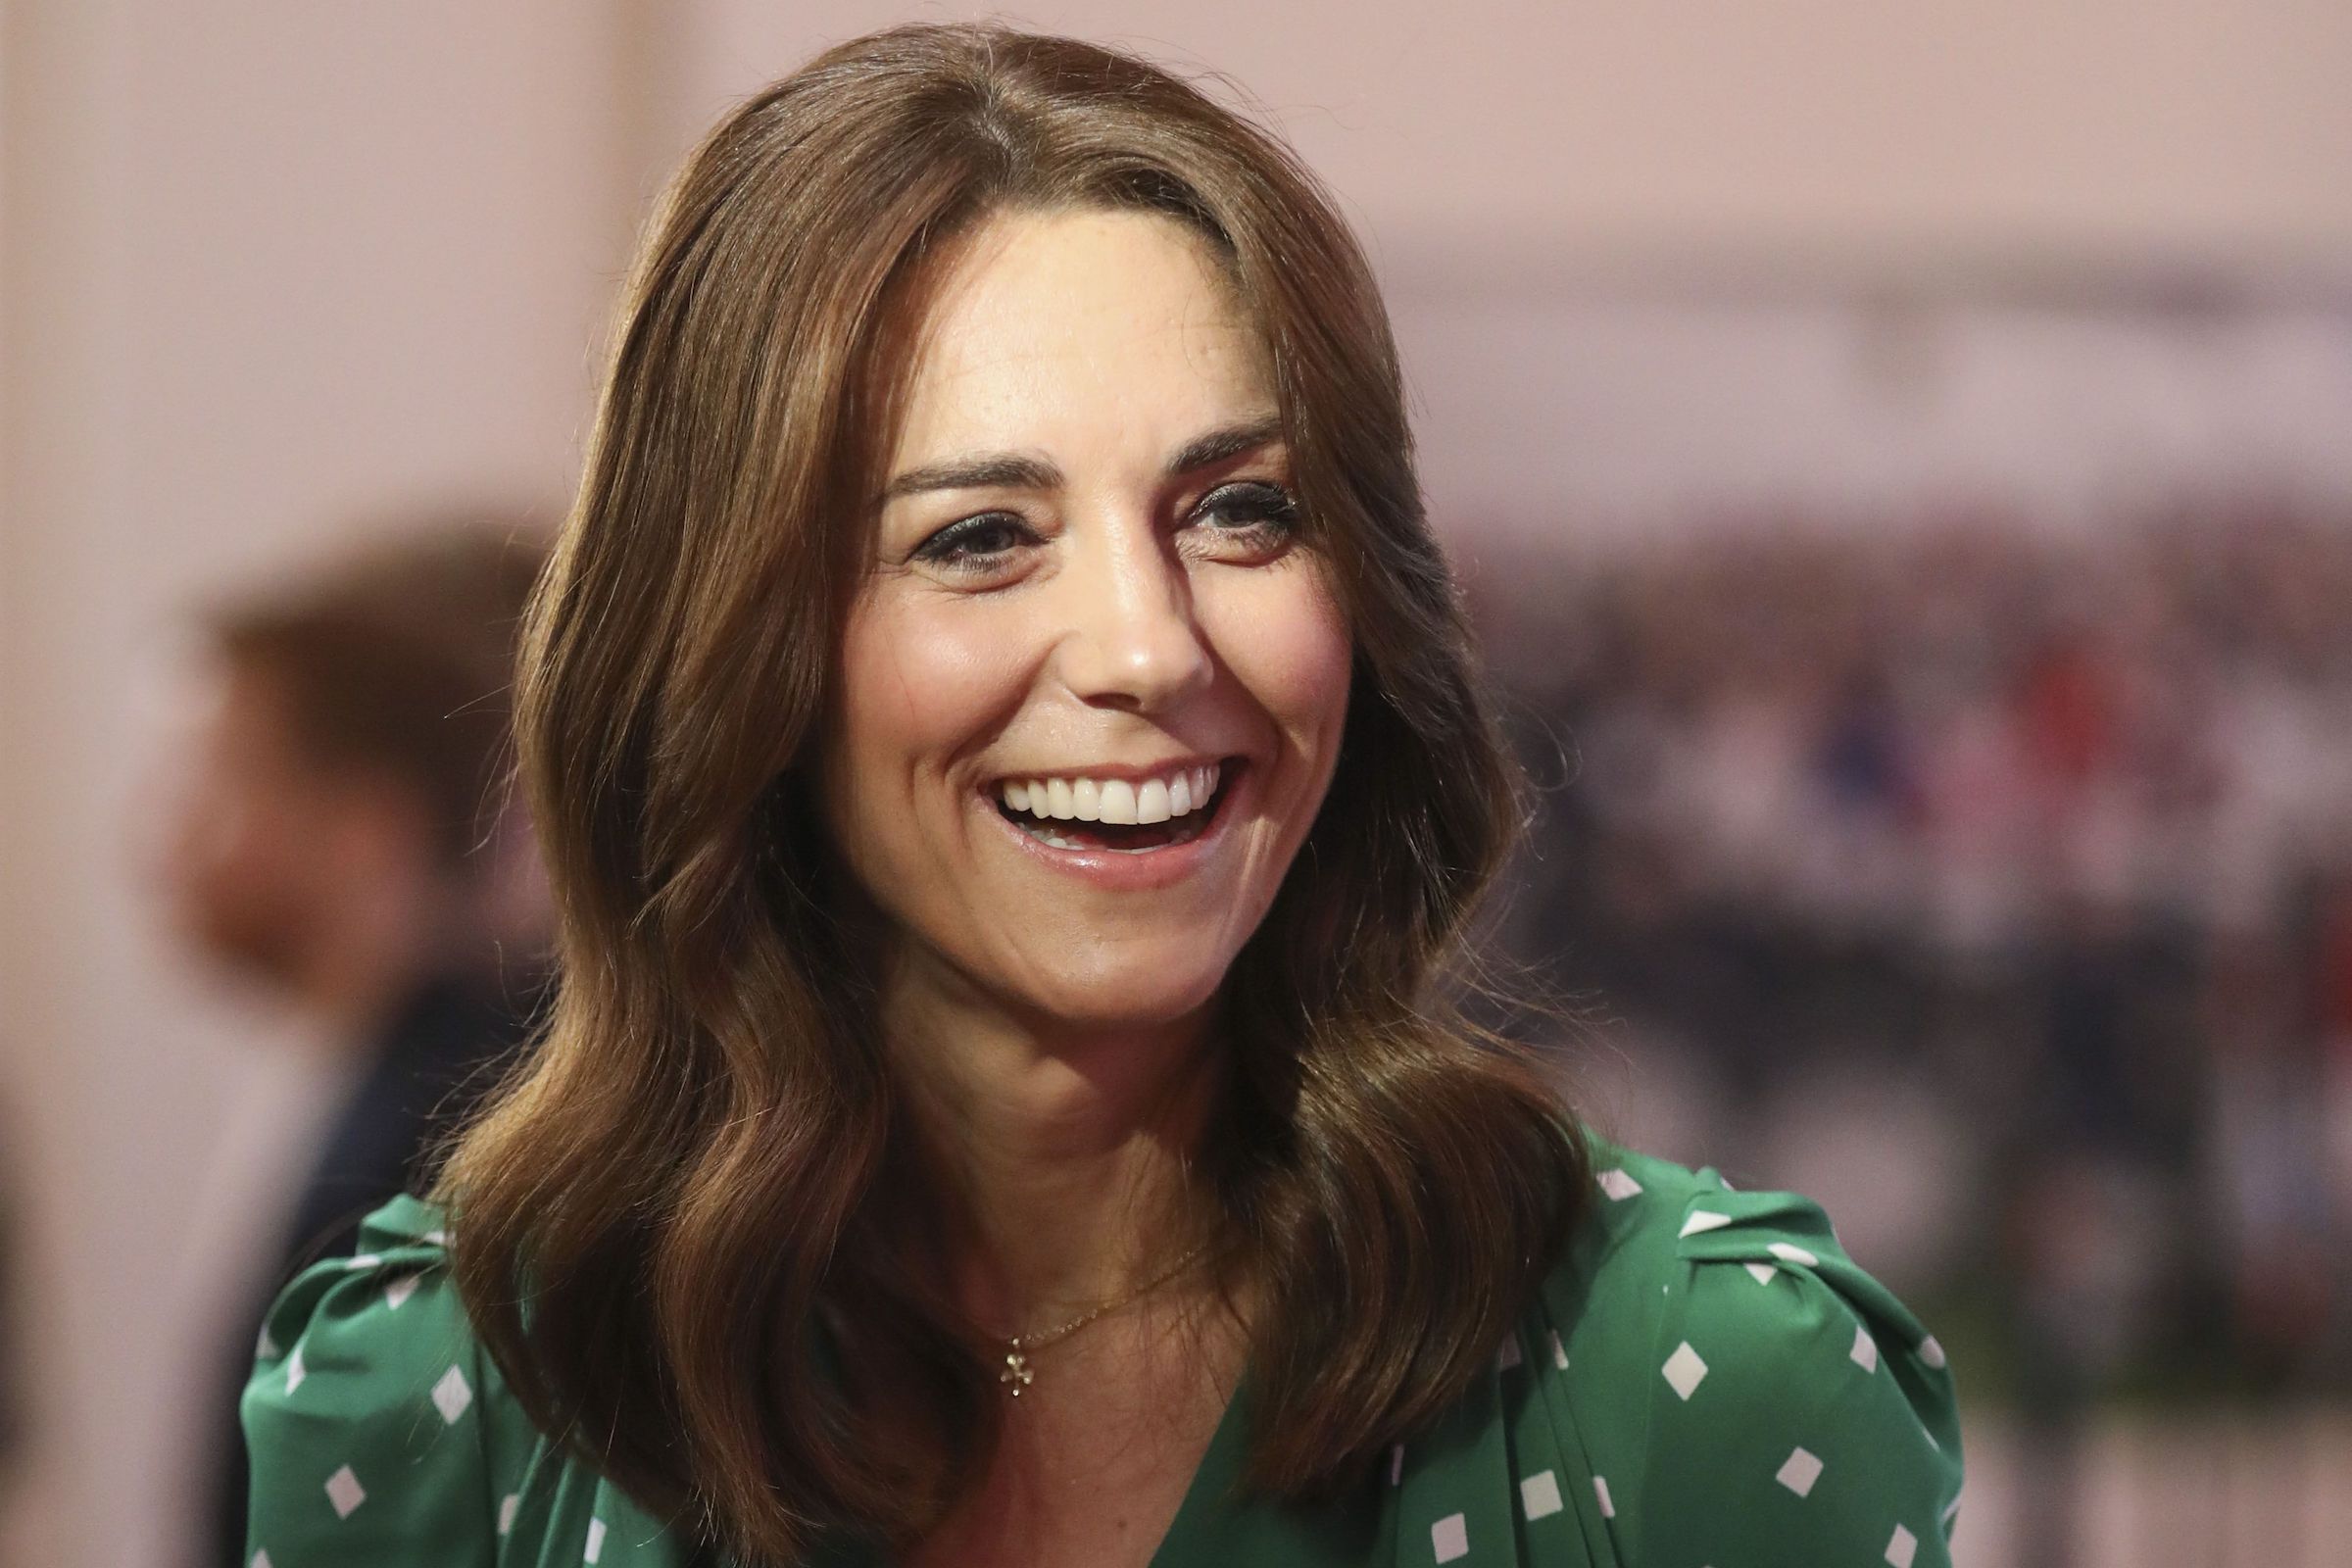 Venture into the elusive labyrinth of Duchess Kate's health. Glean the tea on Kate Middleton's health through royal pregnancies, rumored scandals, and radiant resilience, amidst a wealth of Windsor wellness.